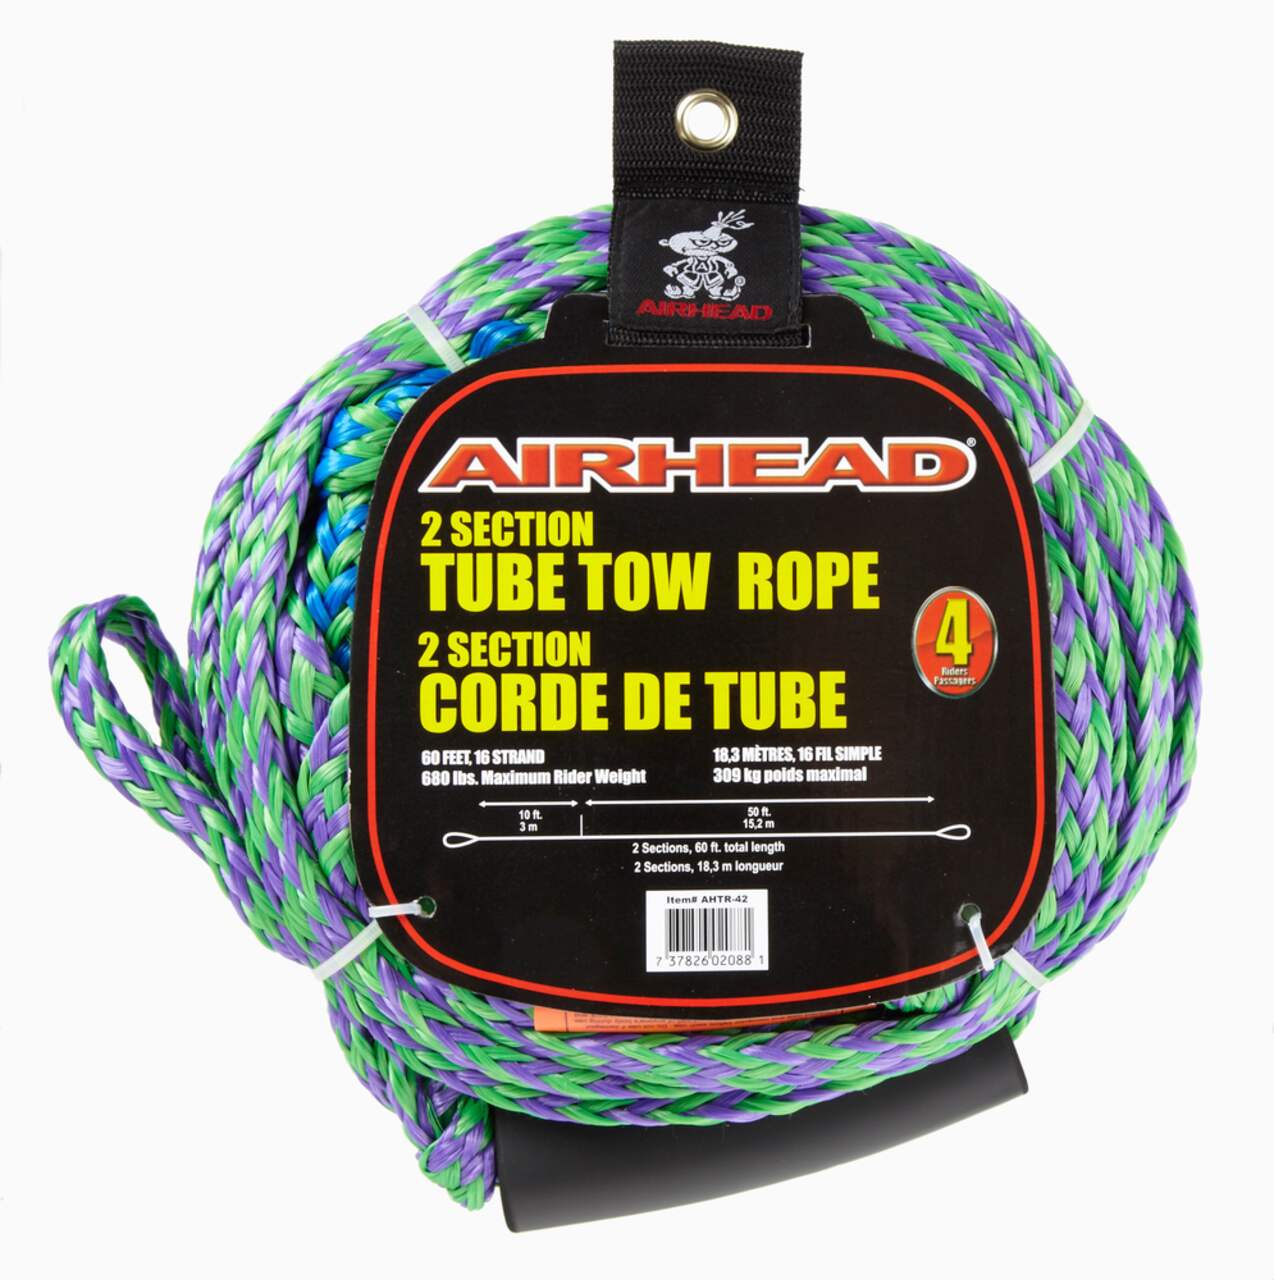 https://media-www.canadiantire.ca/product/playing/seasonal-recreation/marine-water-fun/0797131/towrope-2-section-ec64d659-e70b-4fc9-a877-7d26aa4a28ca.png?imdensity=1&imwidth=640&impolicy=mZoom